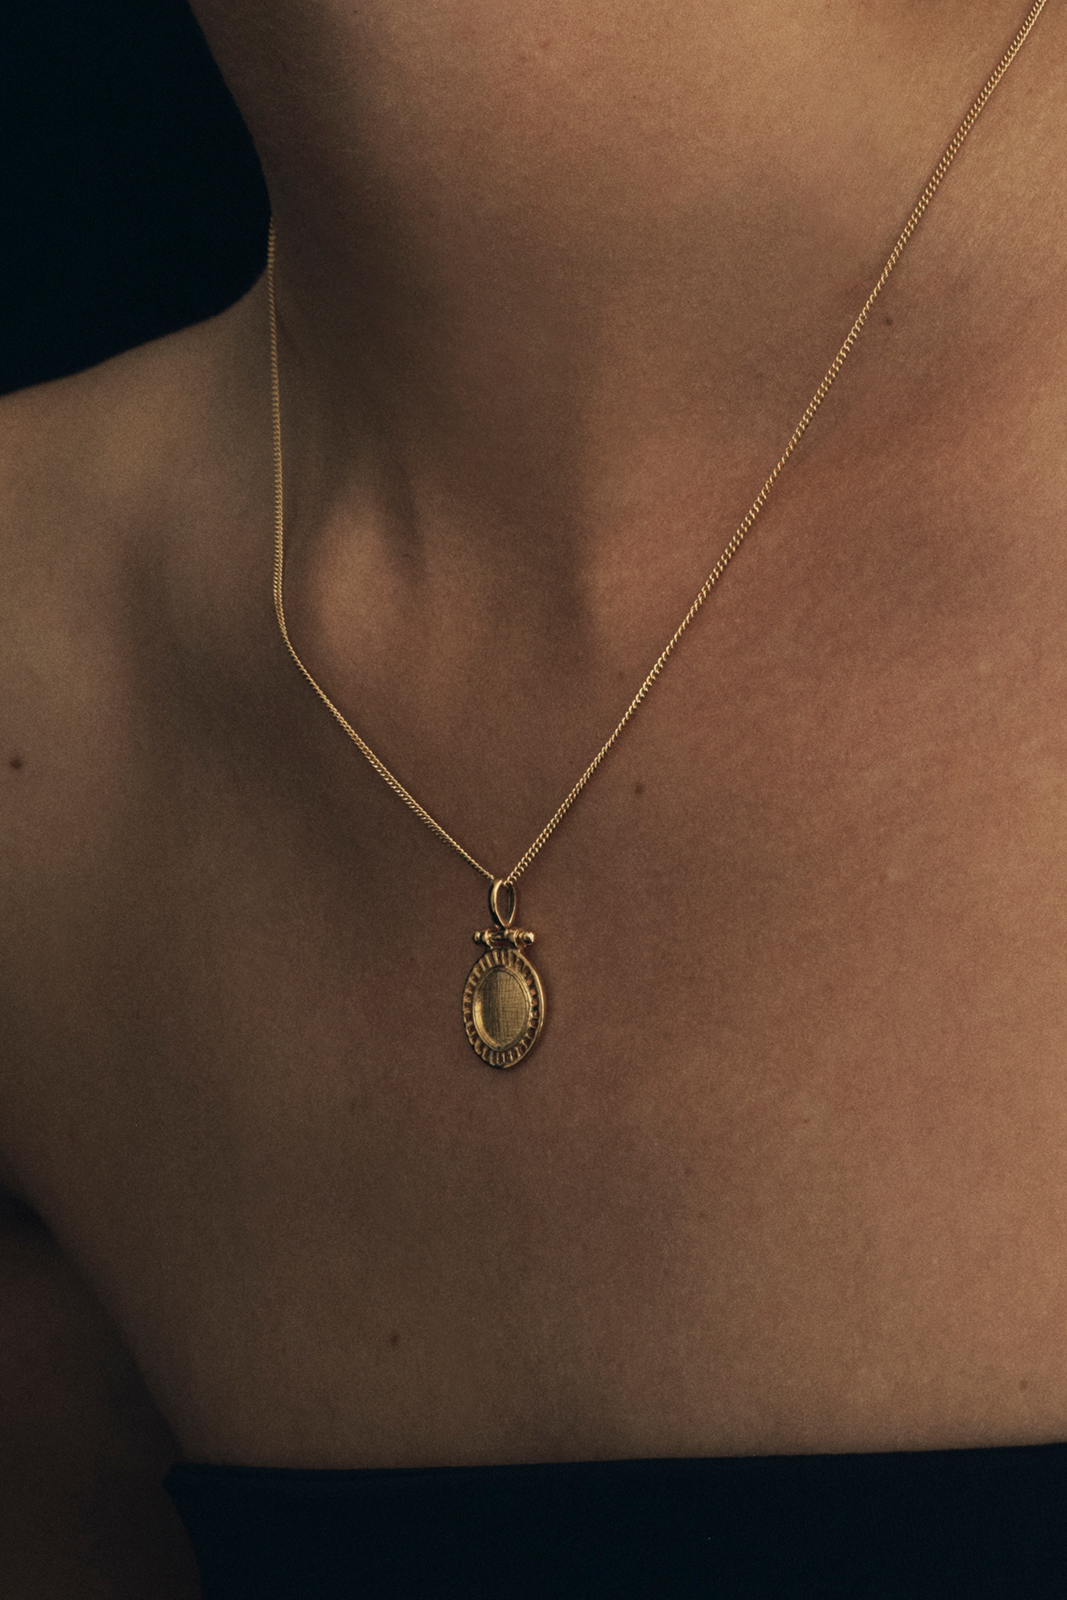 Solar Necklace - Gold